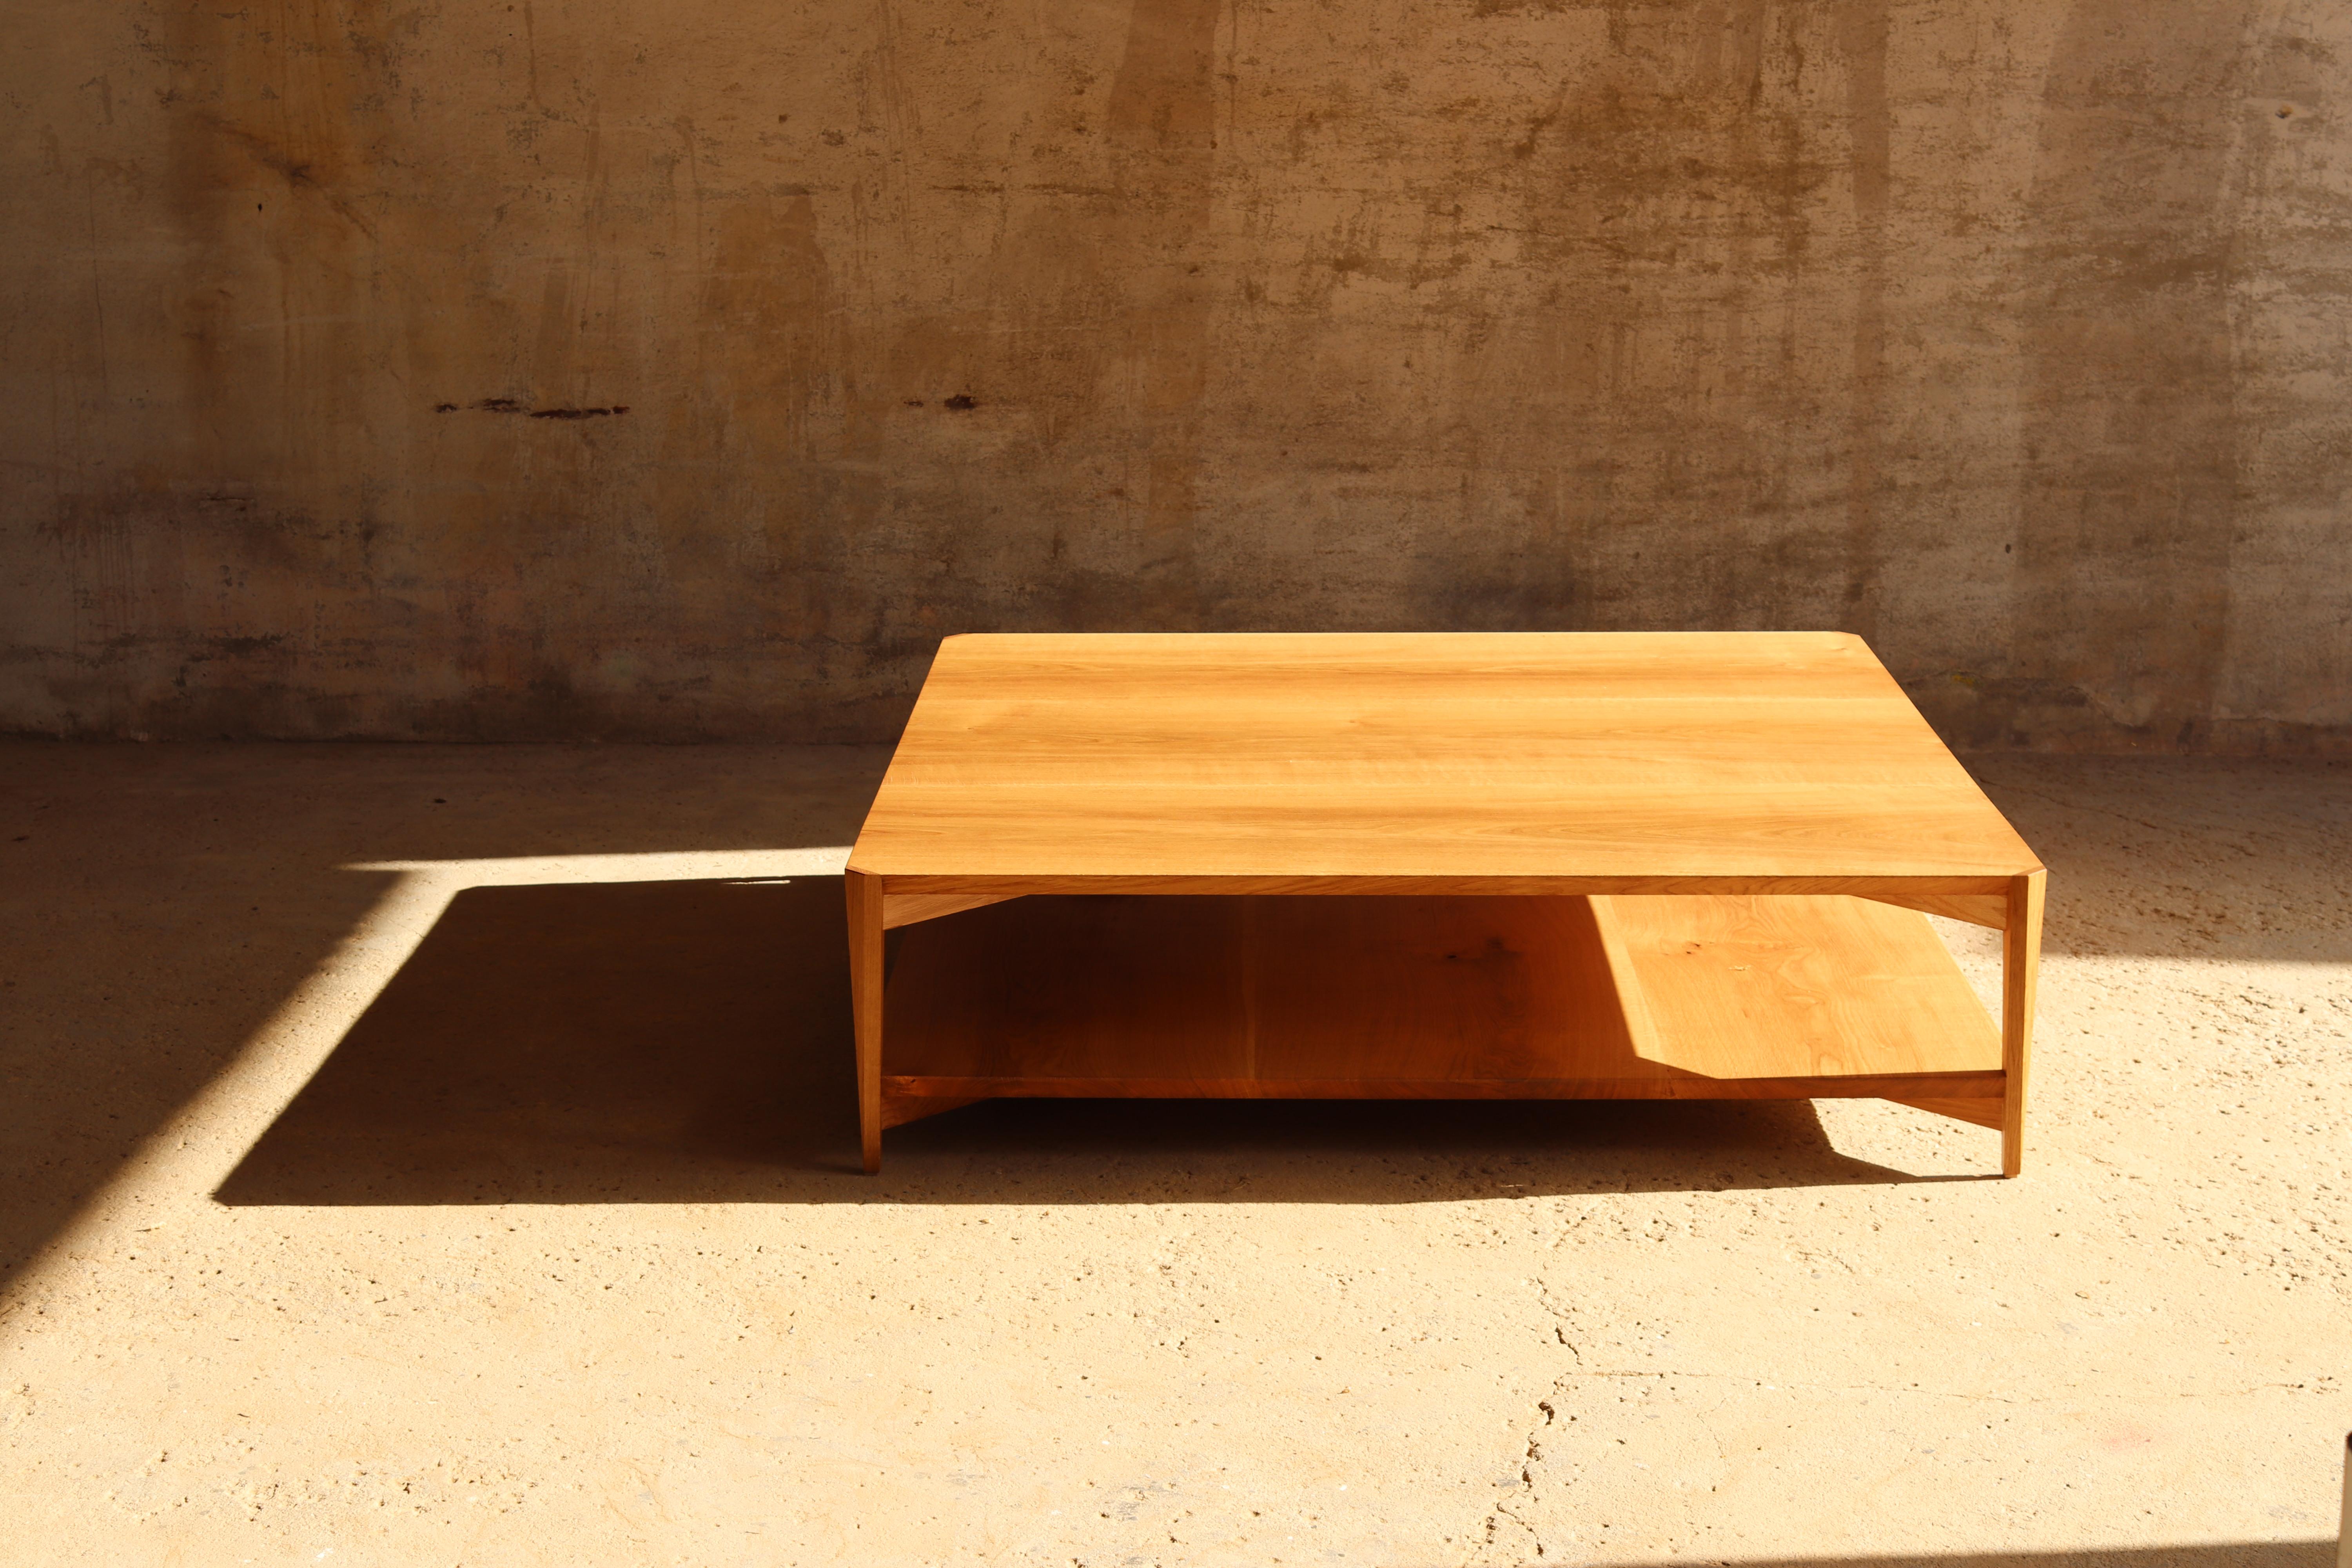 This carefully designed and handcrafted contemporary wooden coffee table by Tomaz Viana was first commissioned for a villa in Sublime Comporta on the Atlantic coast of Portugal.

It´s light and elegant thin legs support a chamfered top and